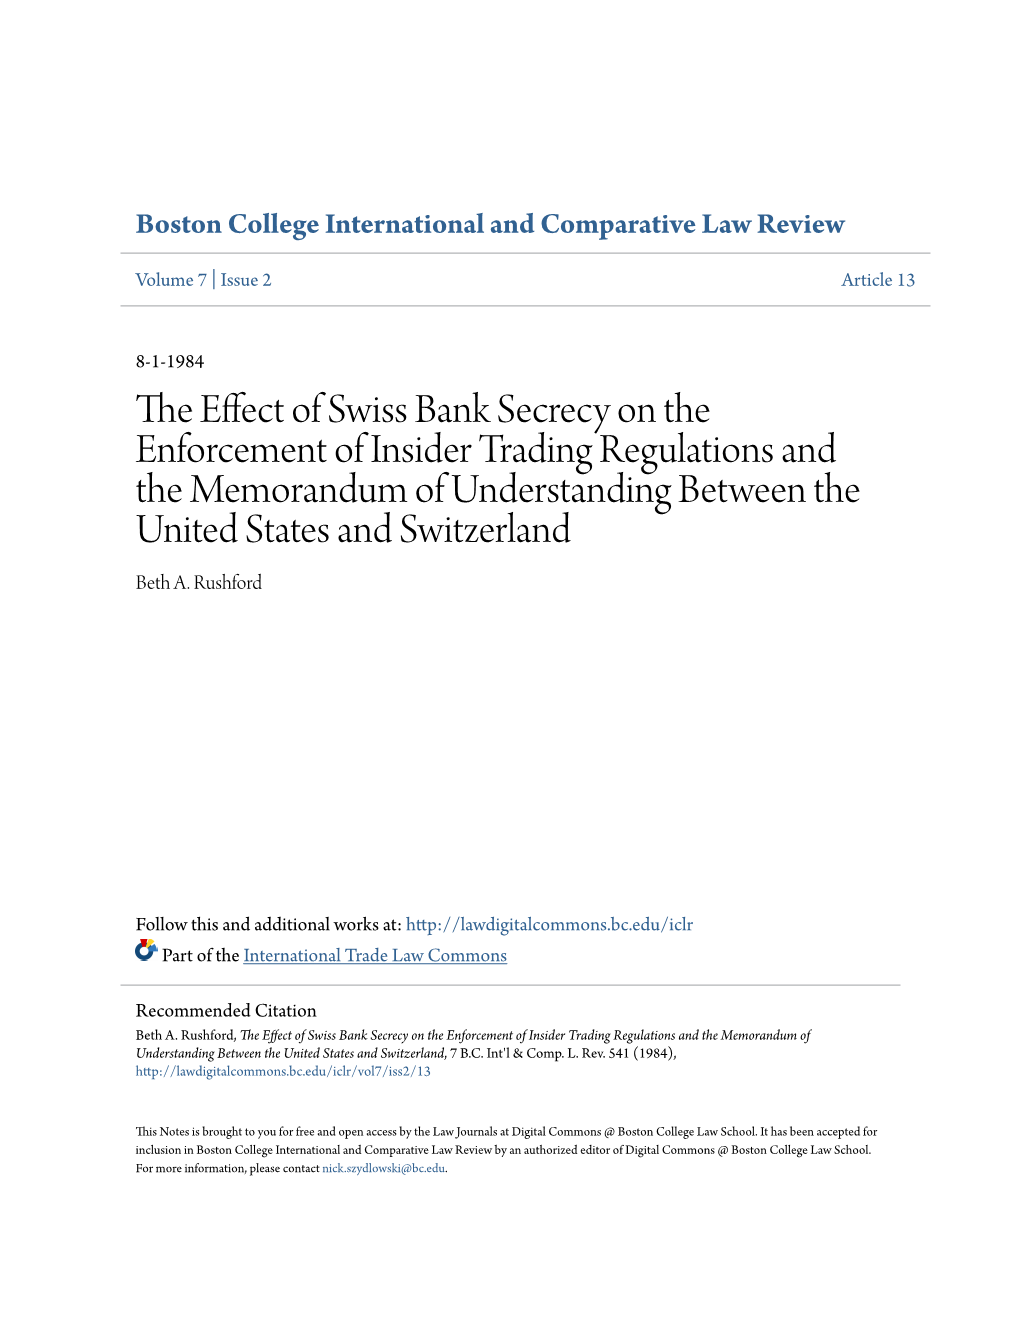 The Effect of Swiss Bank Secrecy on the Enforcement of Insider Trading